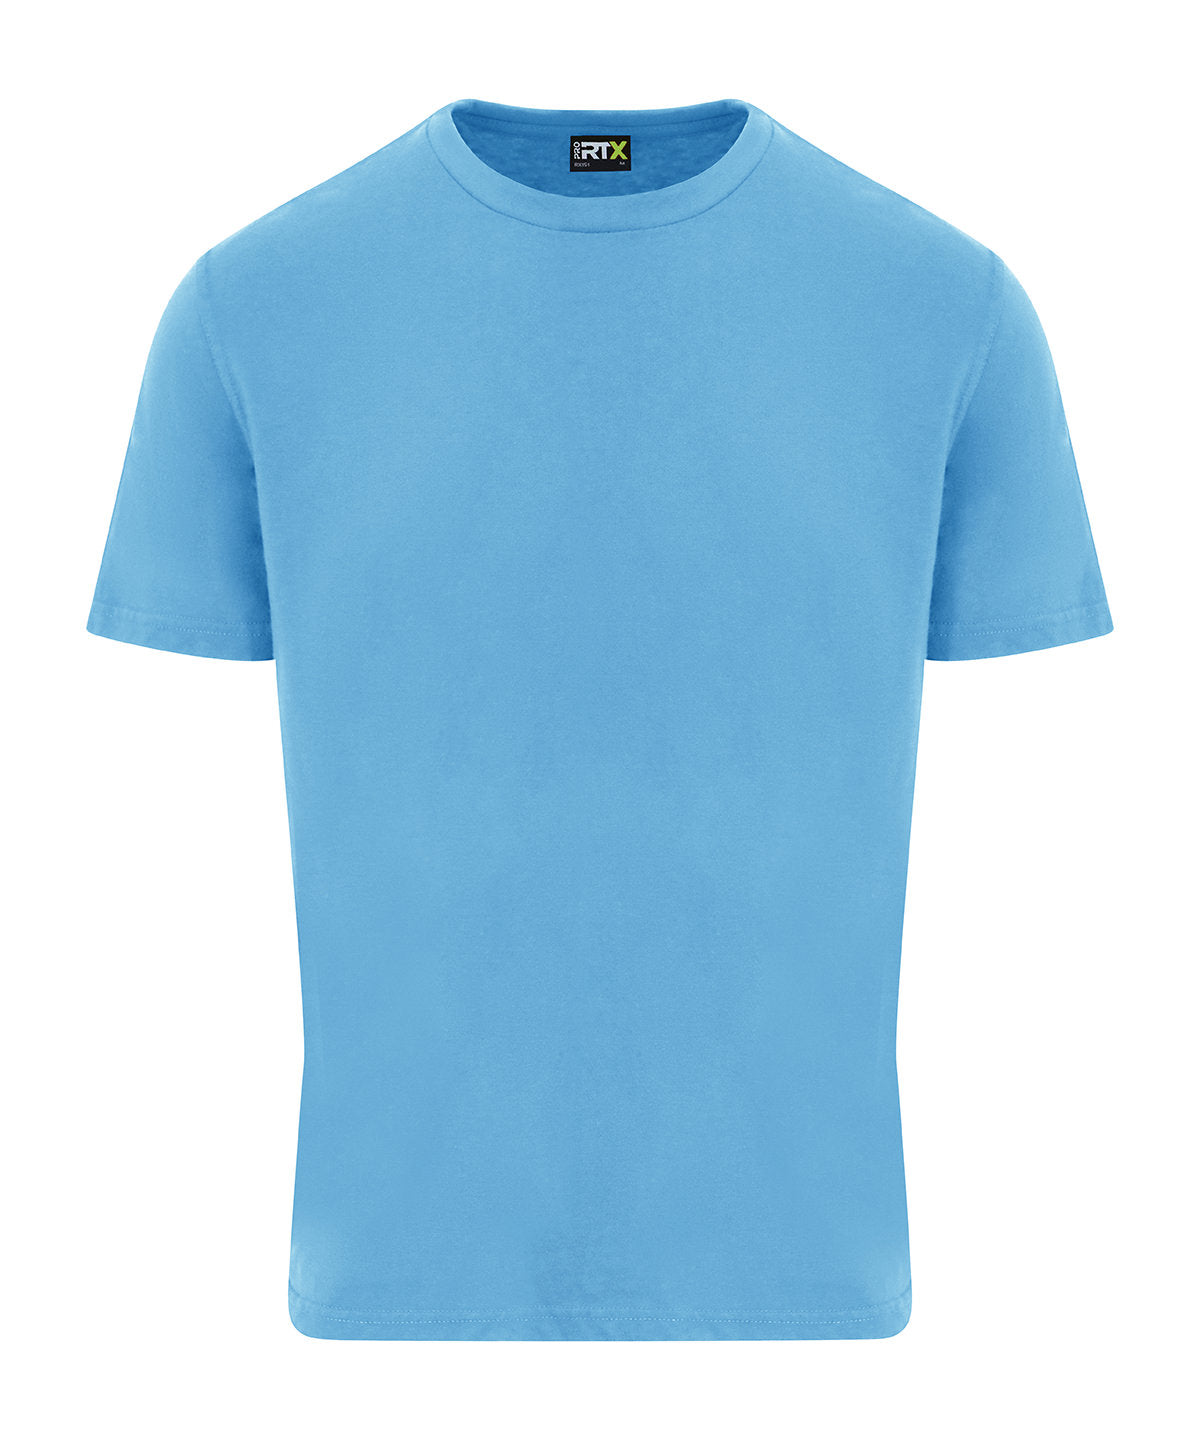 PRO T-SHIRT (RX151) Other Colors - COOZO